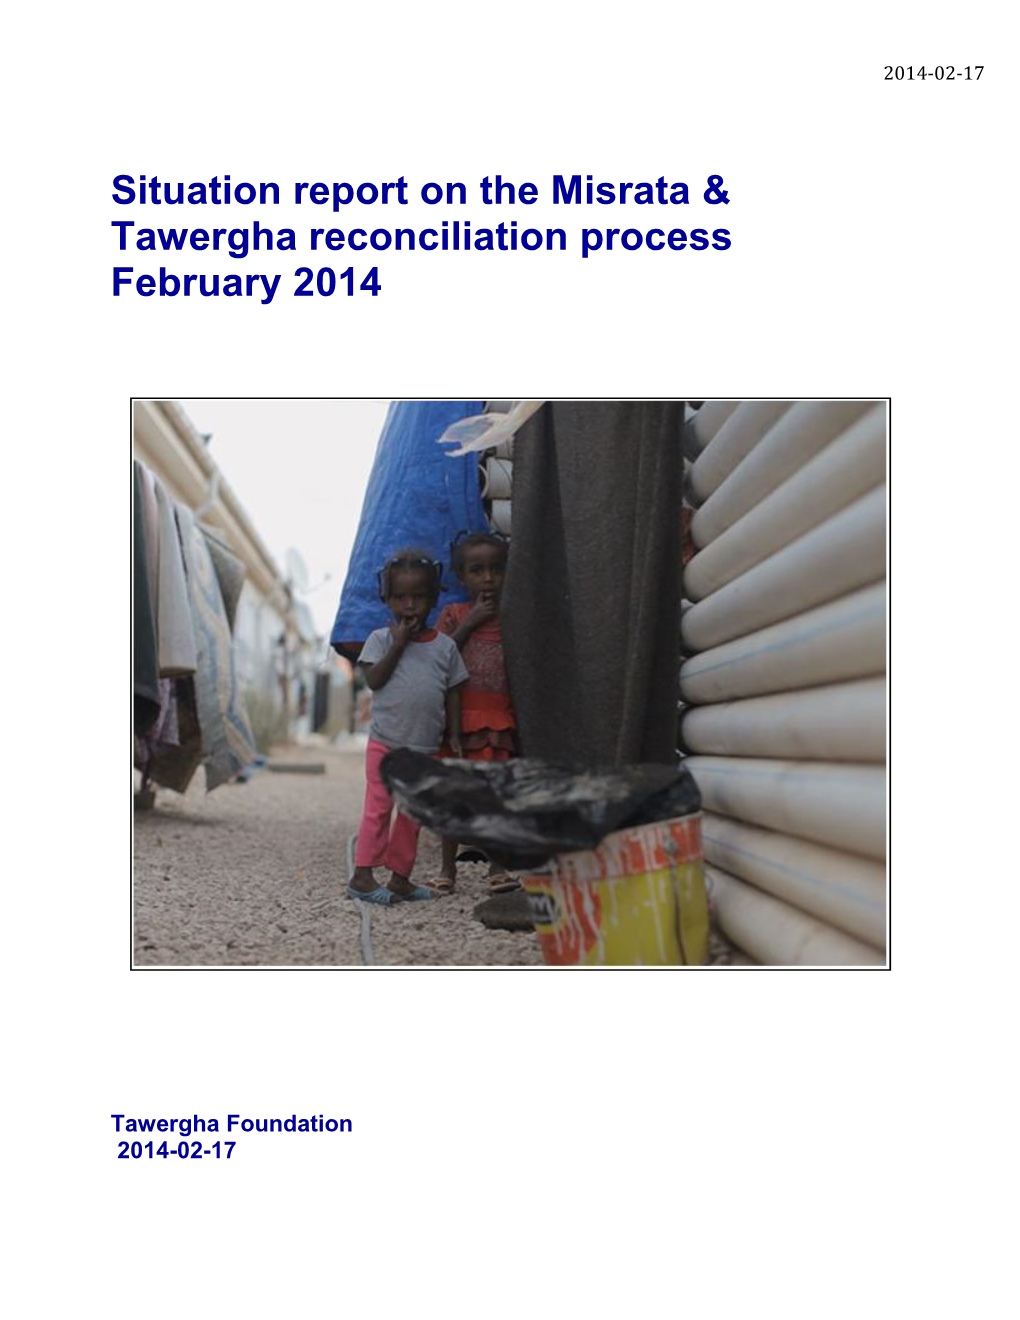 Situation Report on the Misrata & Tawergha Reconciliation Process